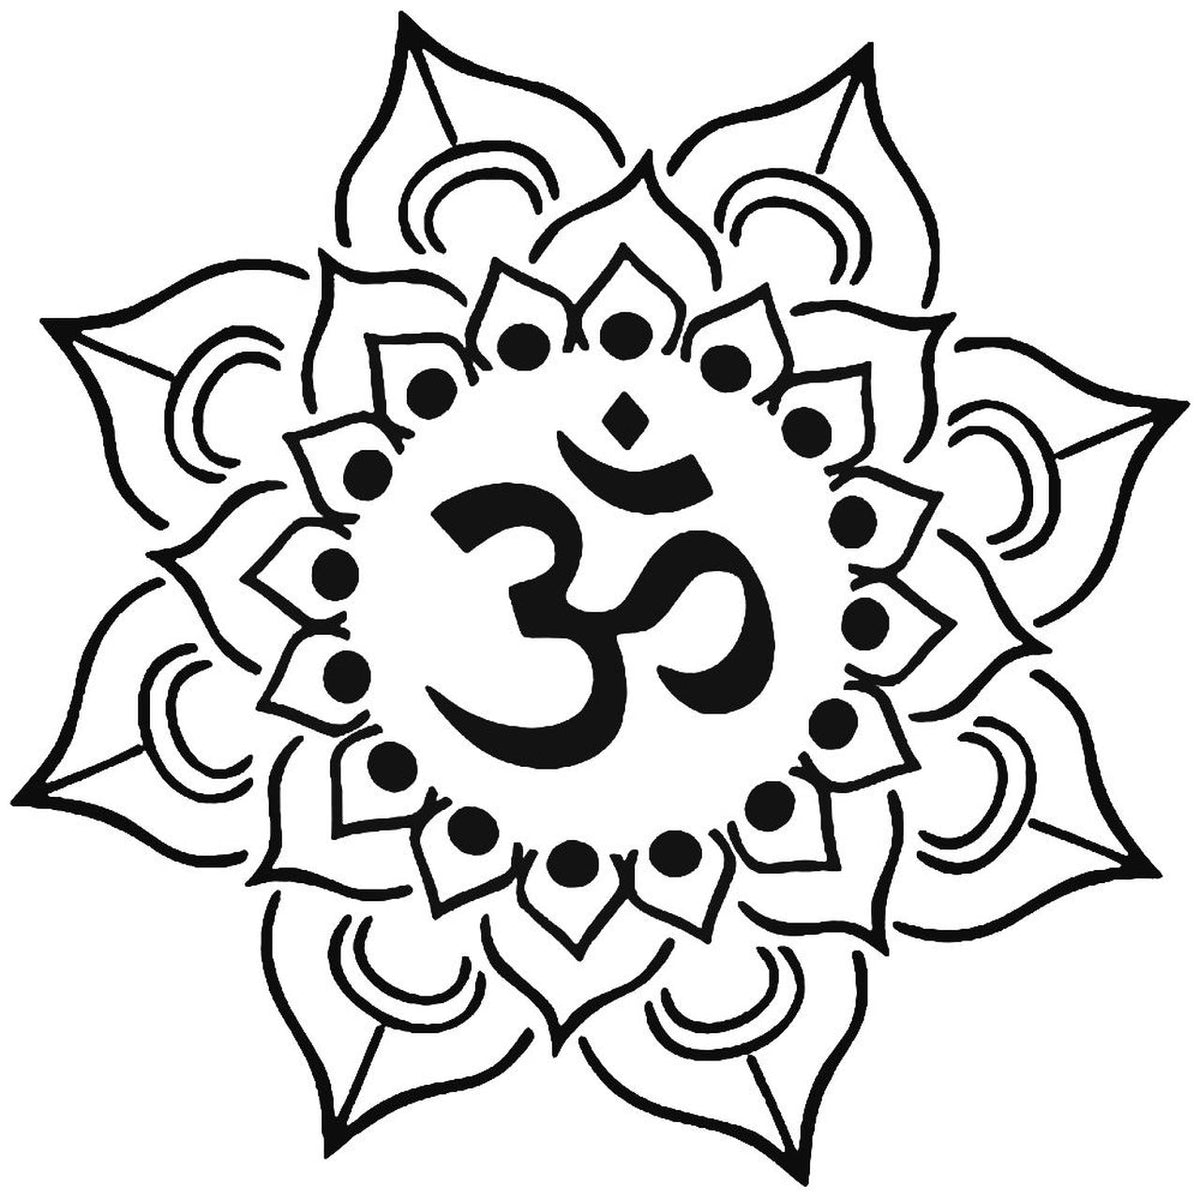 OM - Meaning, Benefits, and Usage.